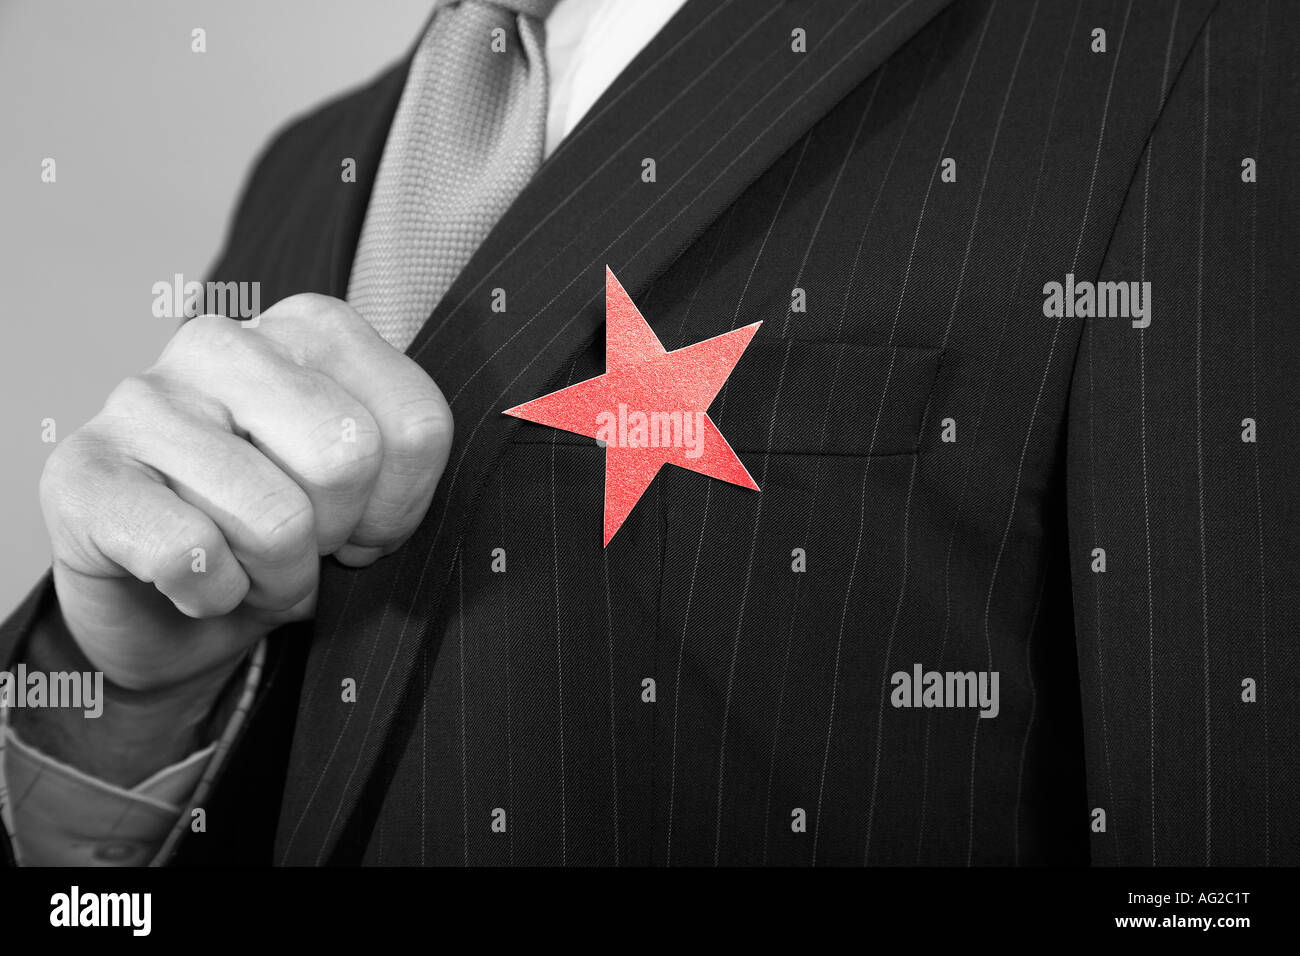 Businessman with Red Star on Suit Stock Photo